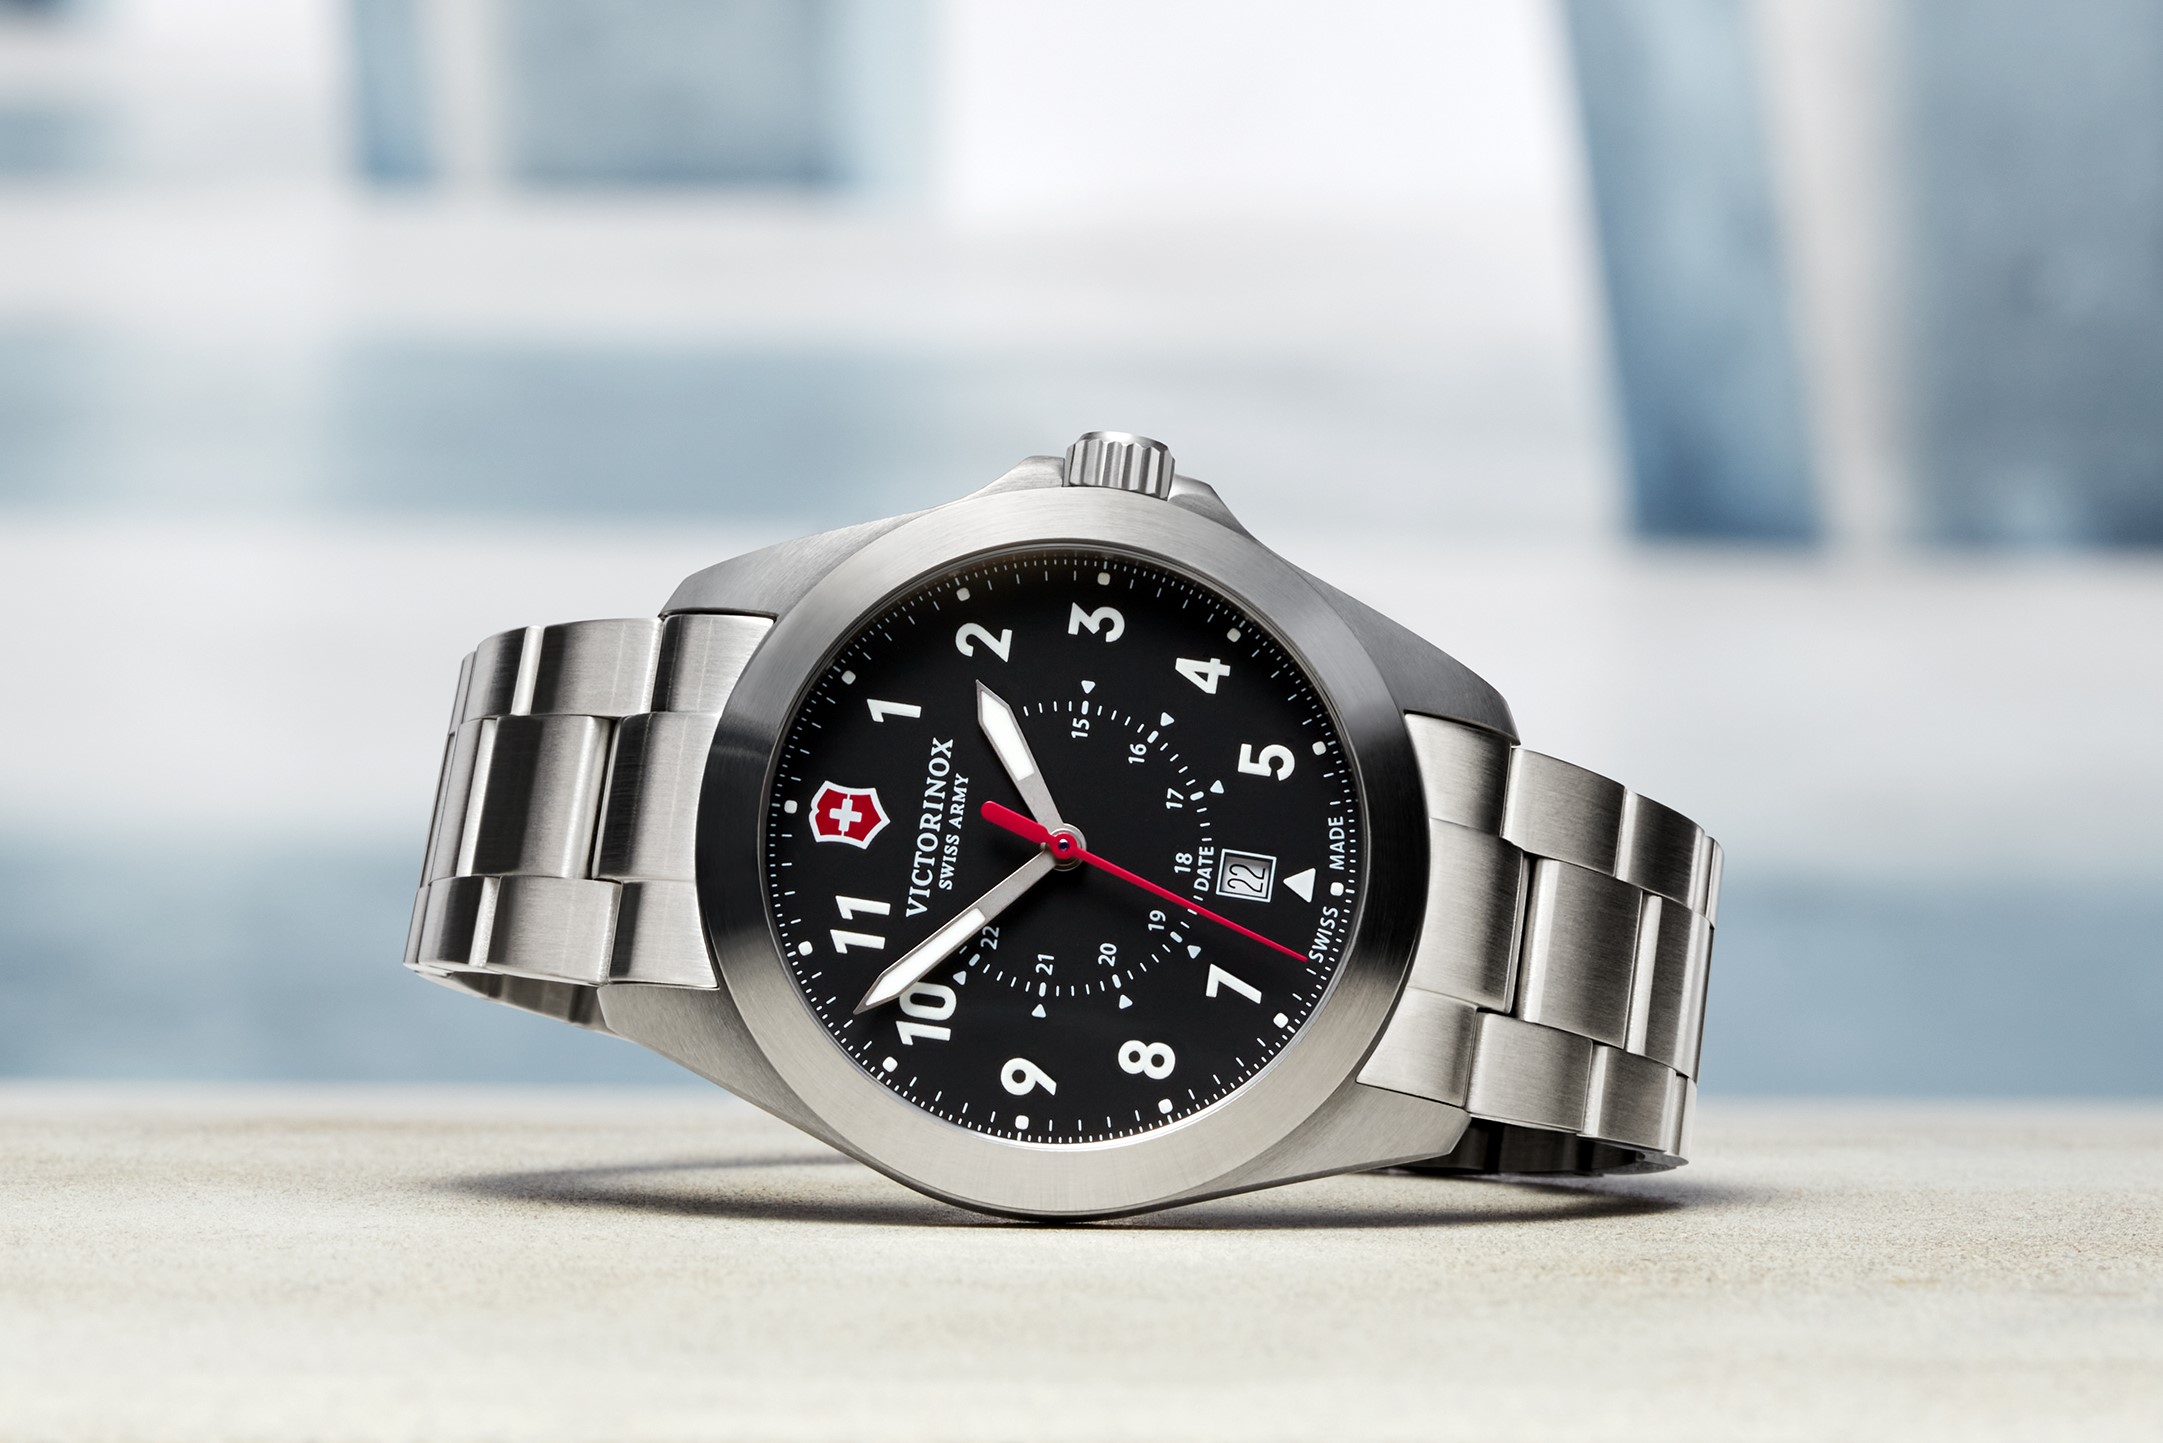 New Victorinox Swiss Army Heritage Collection Inspired By Iconic